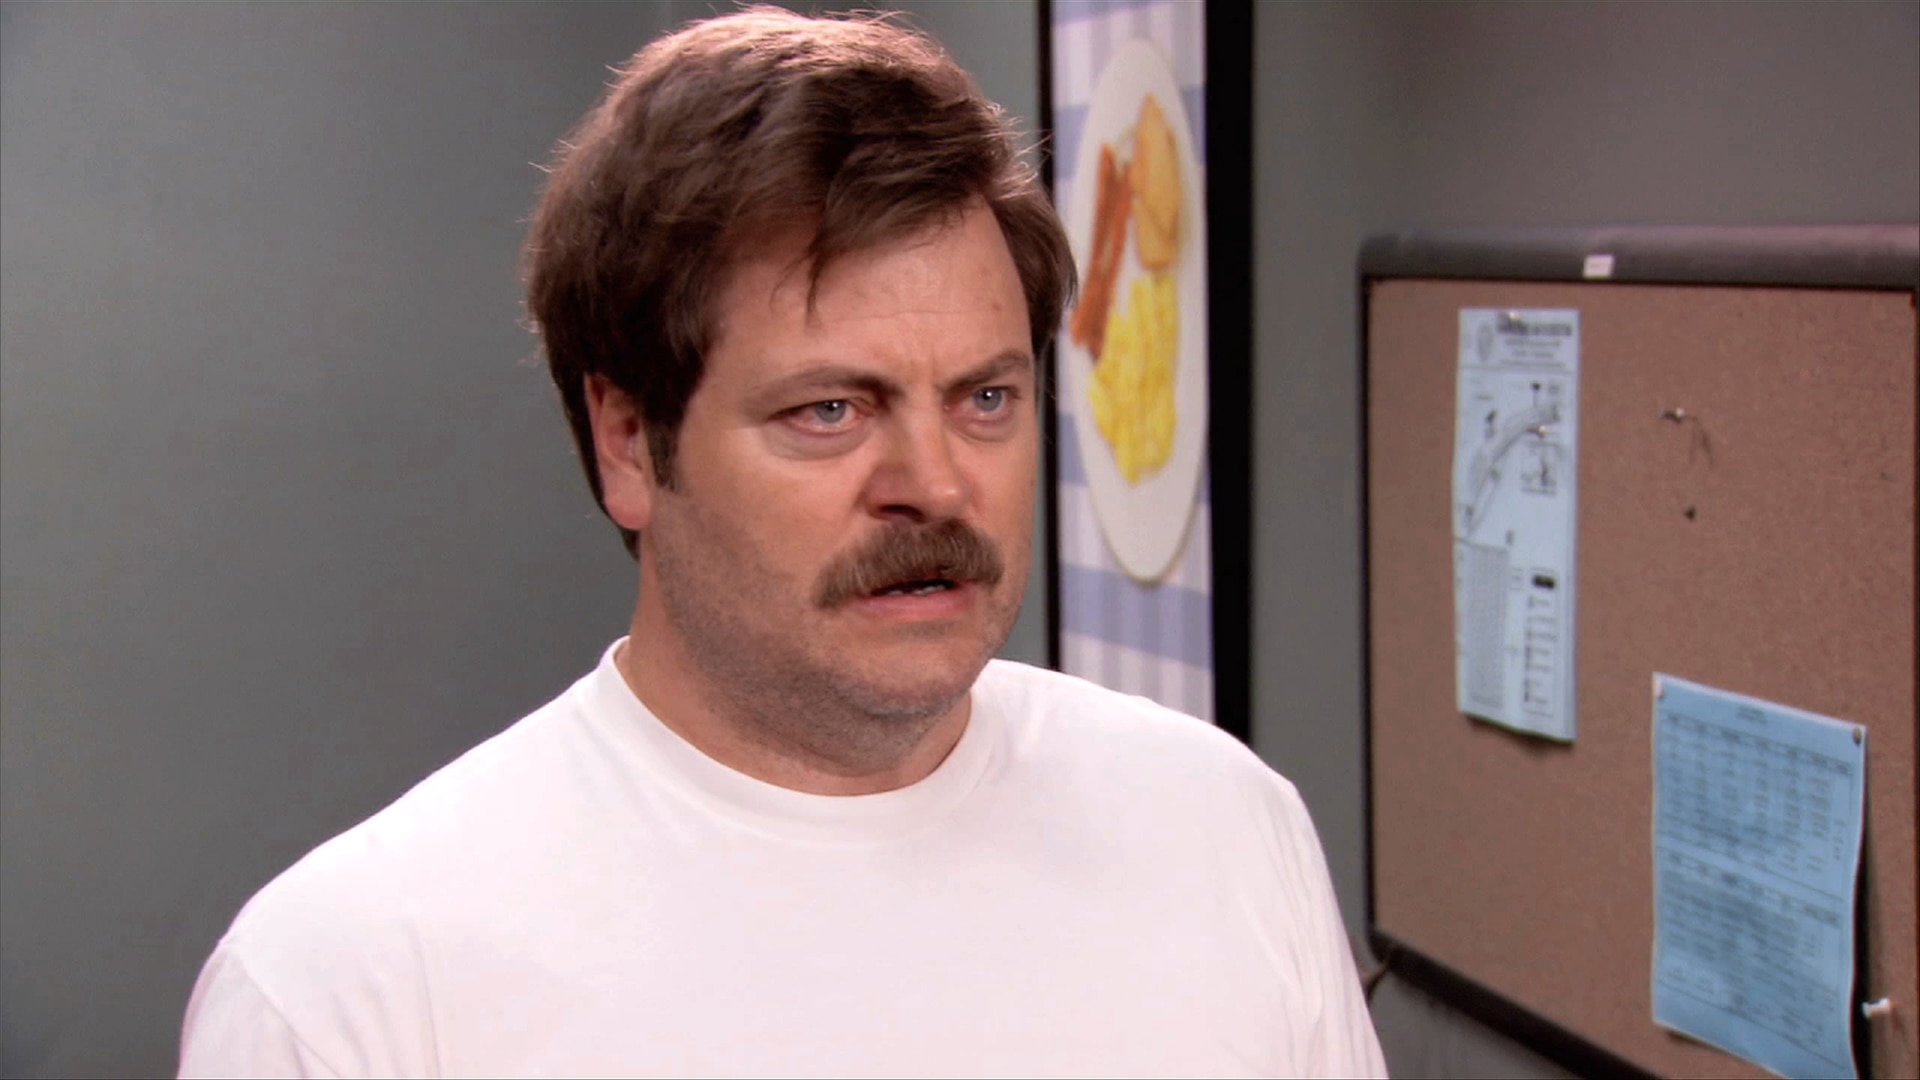 ron parks and rec funt